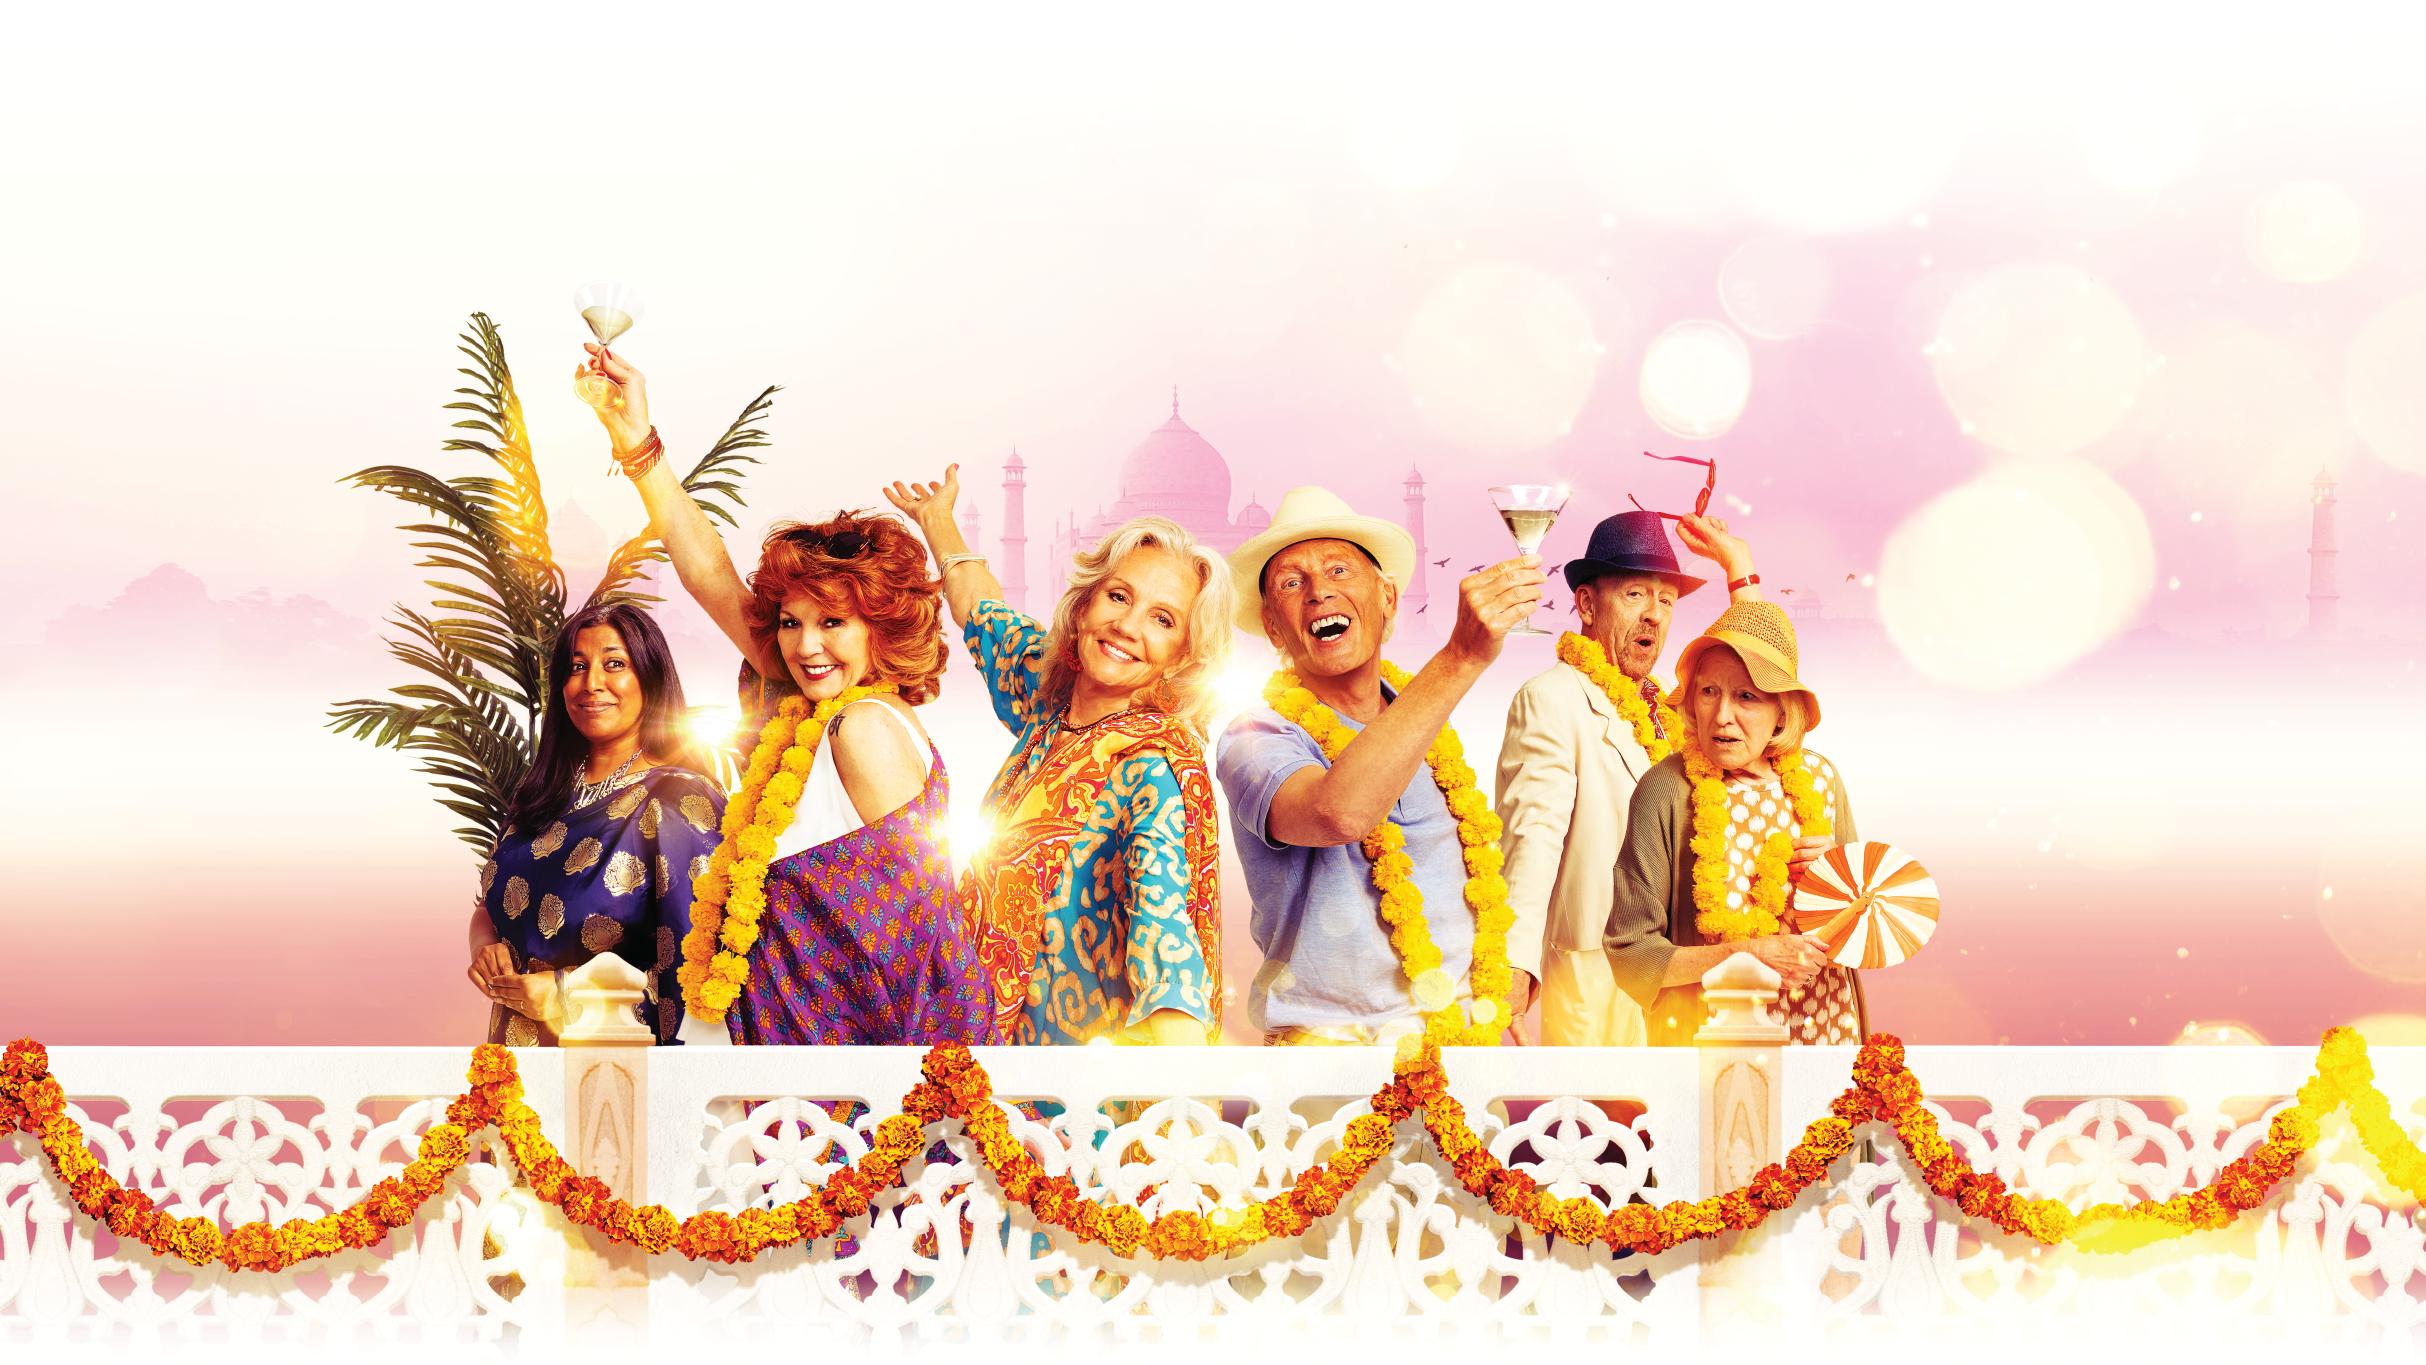 The Ryman Healthcare Season of The Best Exotic Marigold Hotel tickets